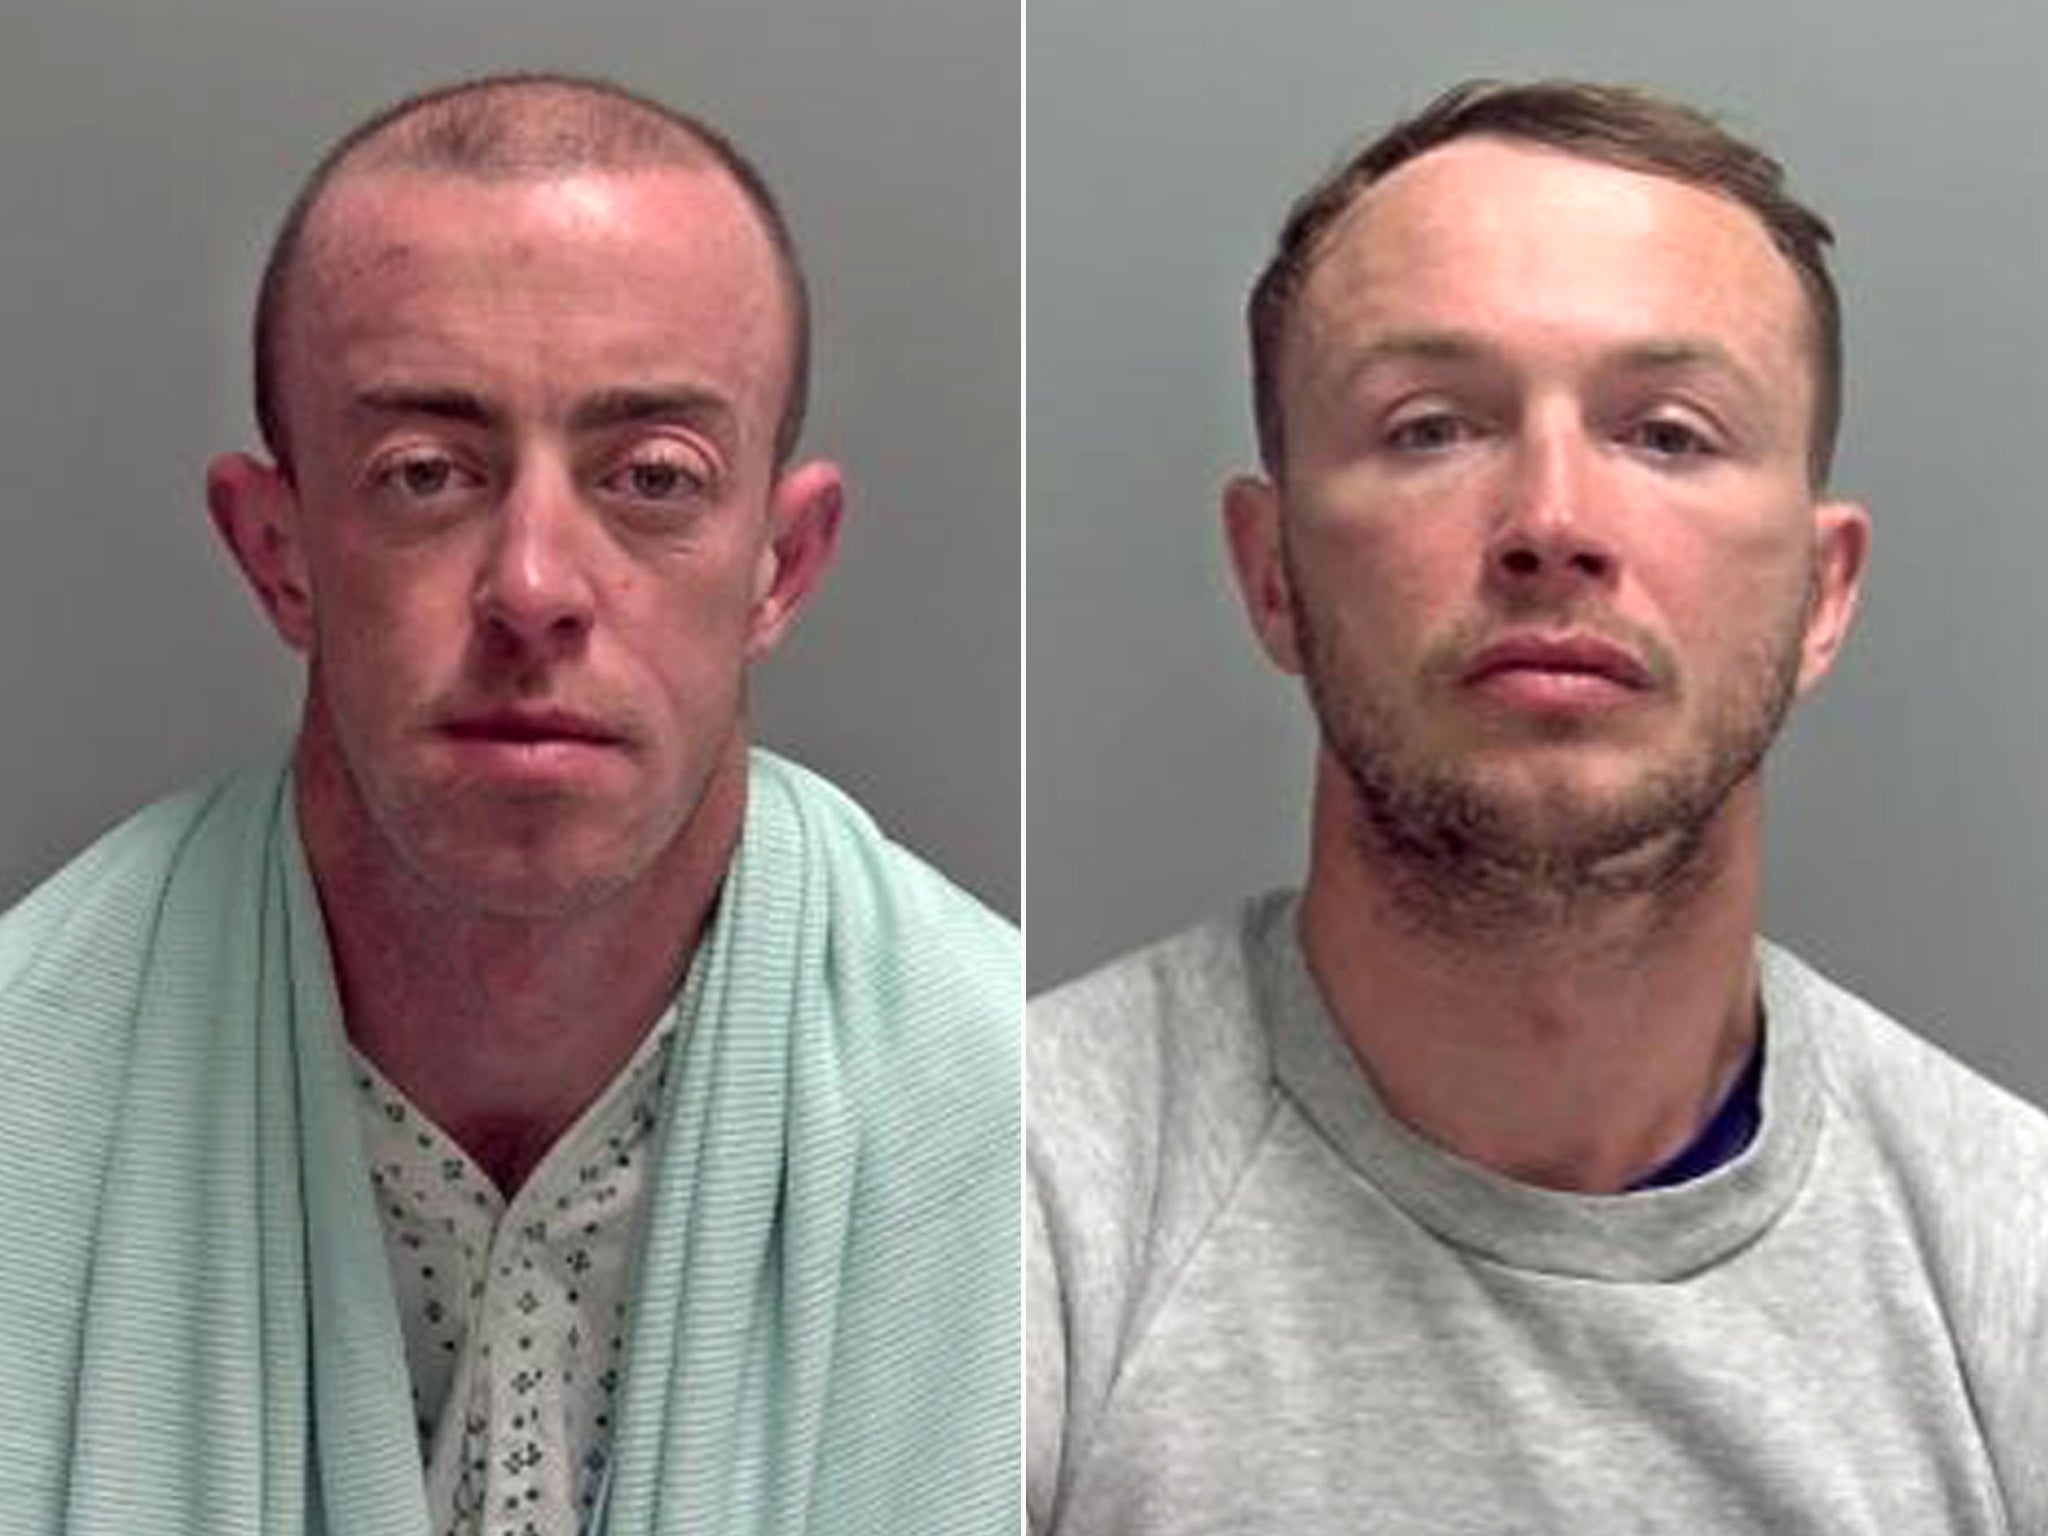 Anthony Reilly, 34, and Steven Brogan, 36, of Skelmersdale in Lancashire, have been sentenced to jail after attempting to cross the North Sea on a jet ski with £200,000 of cocaine